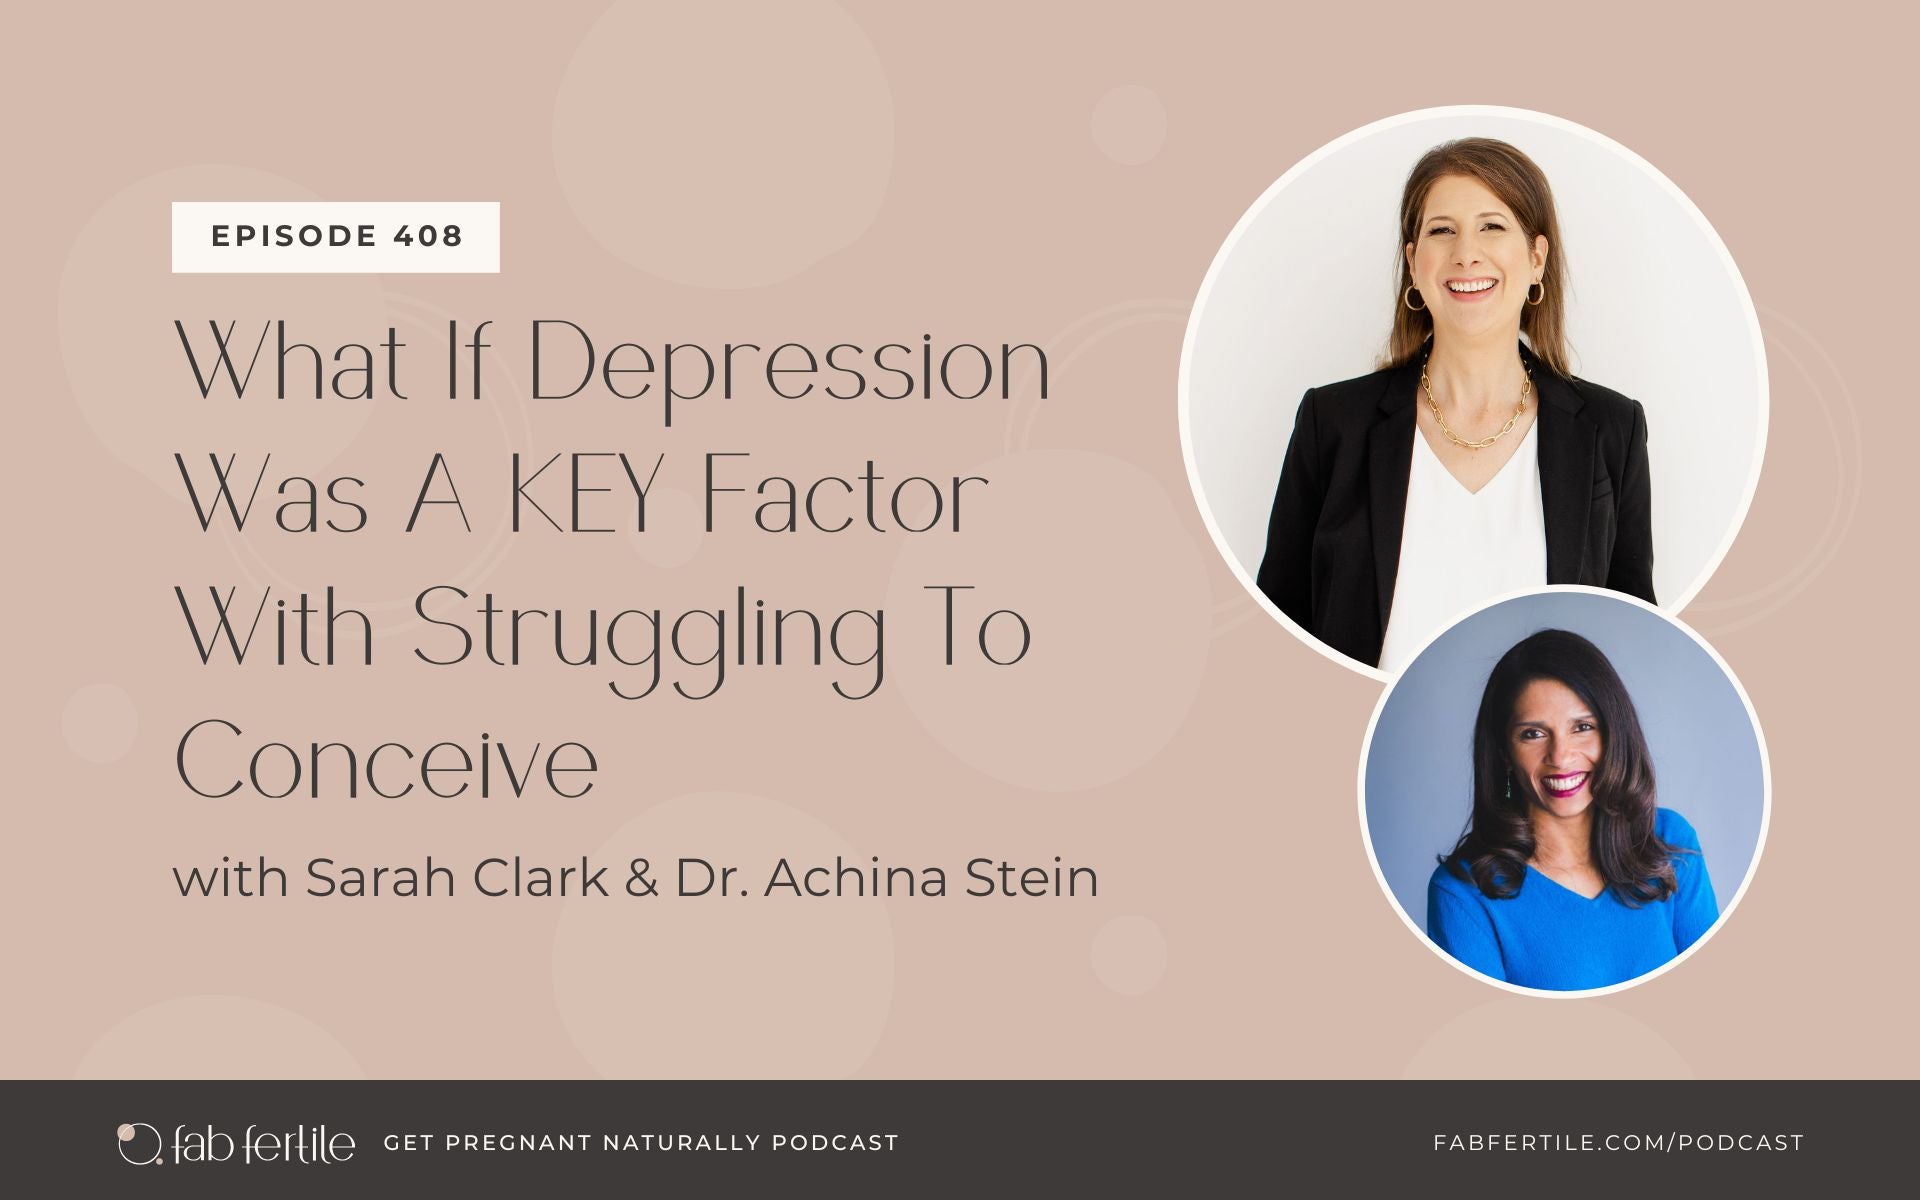 What If Depression Was A KEY Factor With Struggling To Conceive